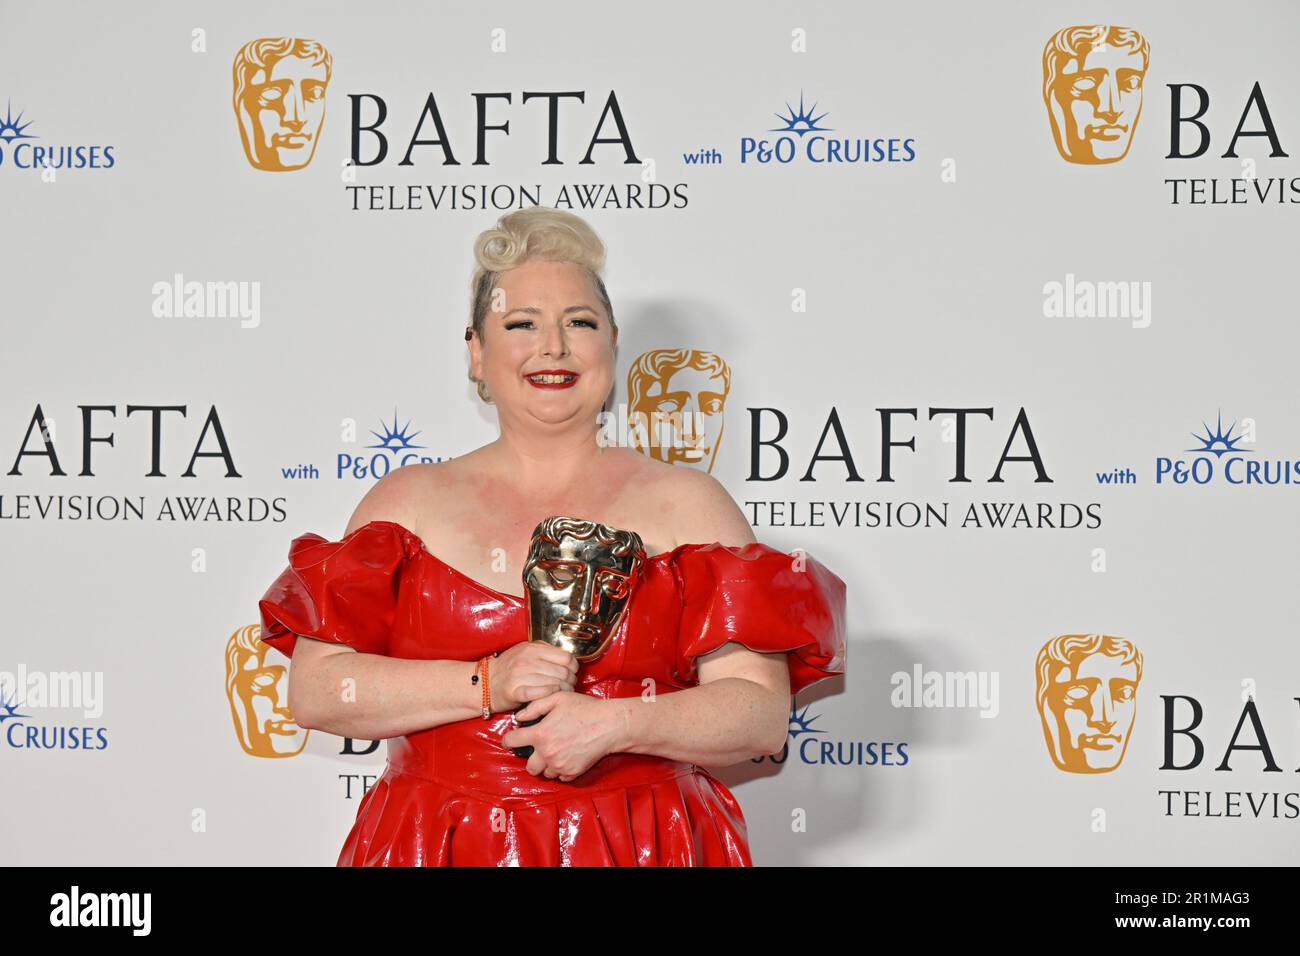 London, UK. 14th May, 2023. Royal Festival Hall, London, UK on May 14 2023. Siobhan McSweeney (Derry Girls) wins the Female Performance in a Comedy at the BAFTA 2023 Television Awards with P&O Cruises at the Royal Festival Hall, London, UK on May 14 2023. Credit: Francis Knight/Alamy Live News Stock Photo